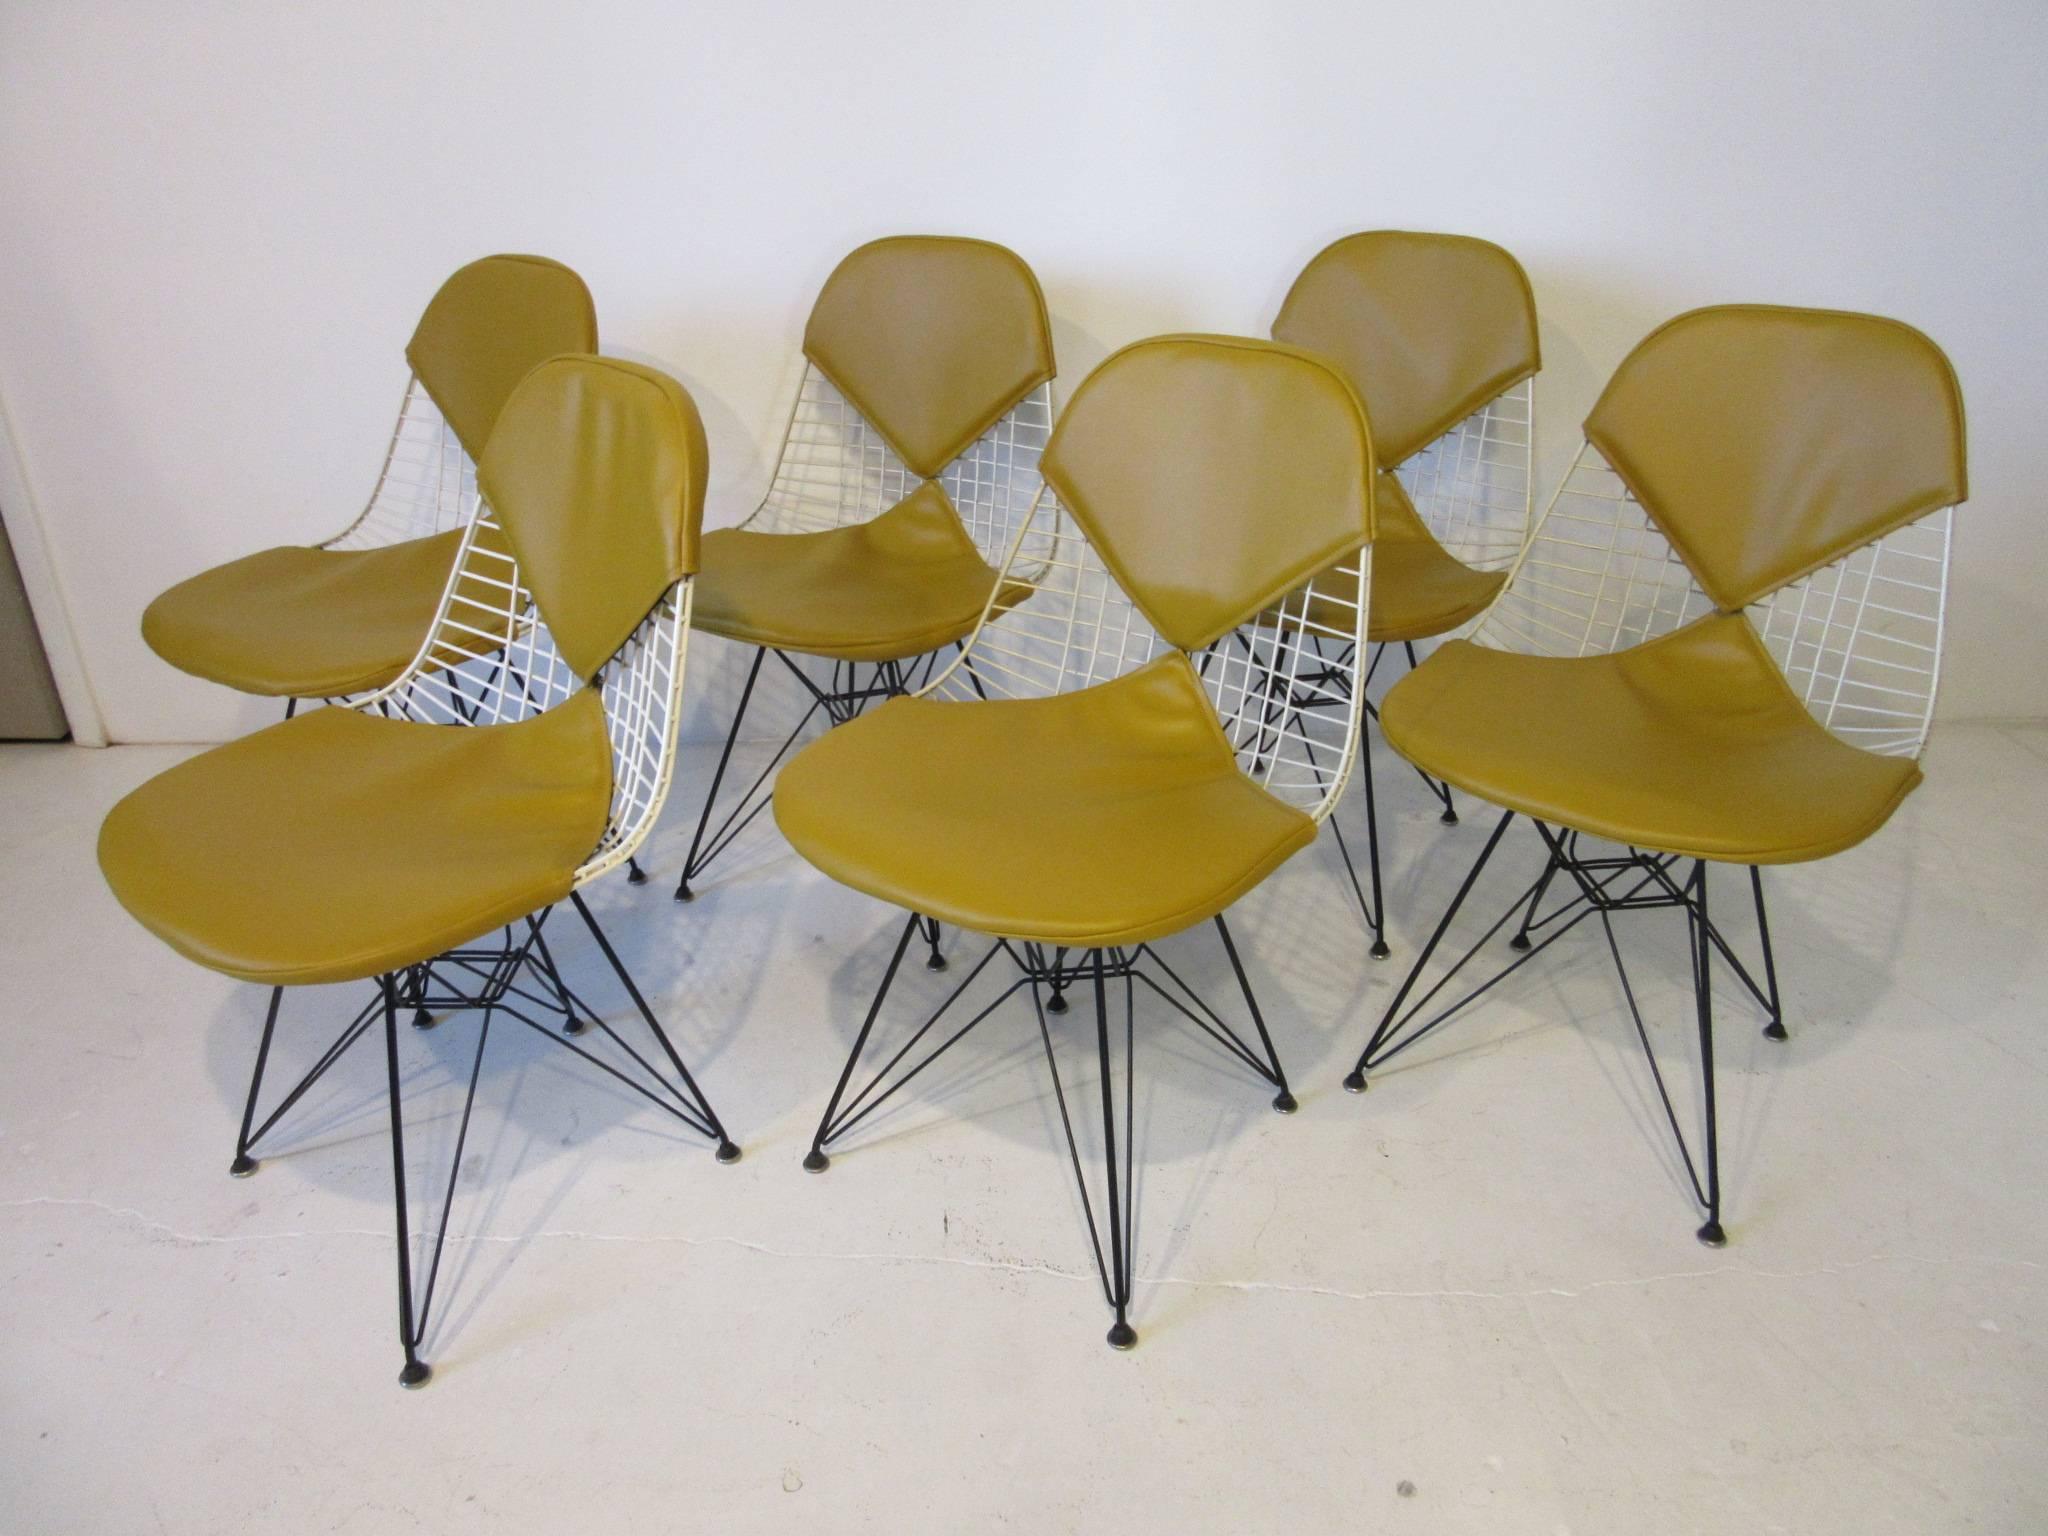 Eames Herman Miller Wire and Upholstered Eiffel Tower Dining Chairs 1